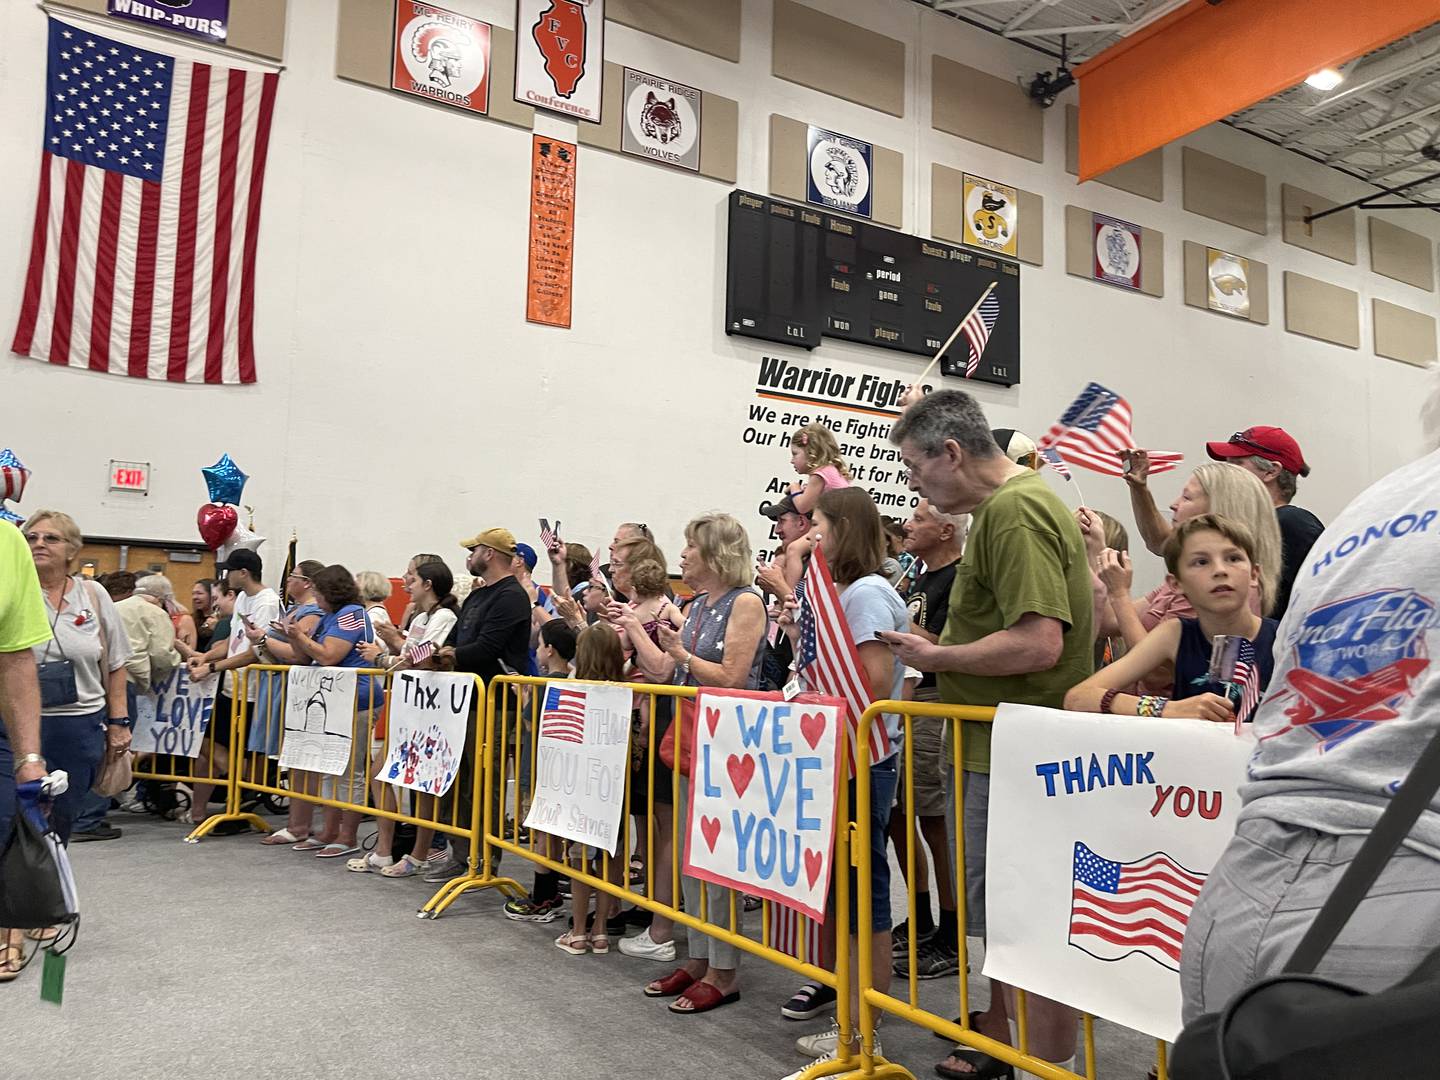 Attendees wait local veterans to arrive on Sunday, Aug. 28, 2022 at McHenry High School. More than 50 veterans who went on the Honor Flight over the weekend to visit war memorials in Washington D.C. and were welcomed home at McHenry High School.